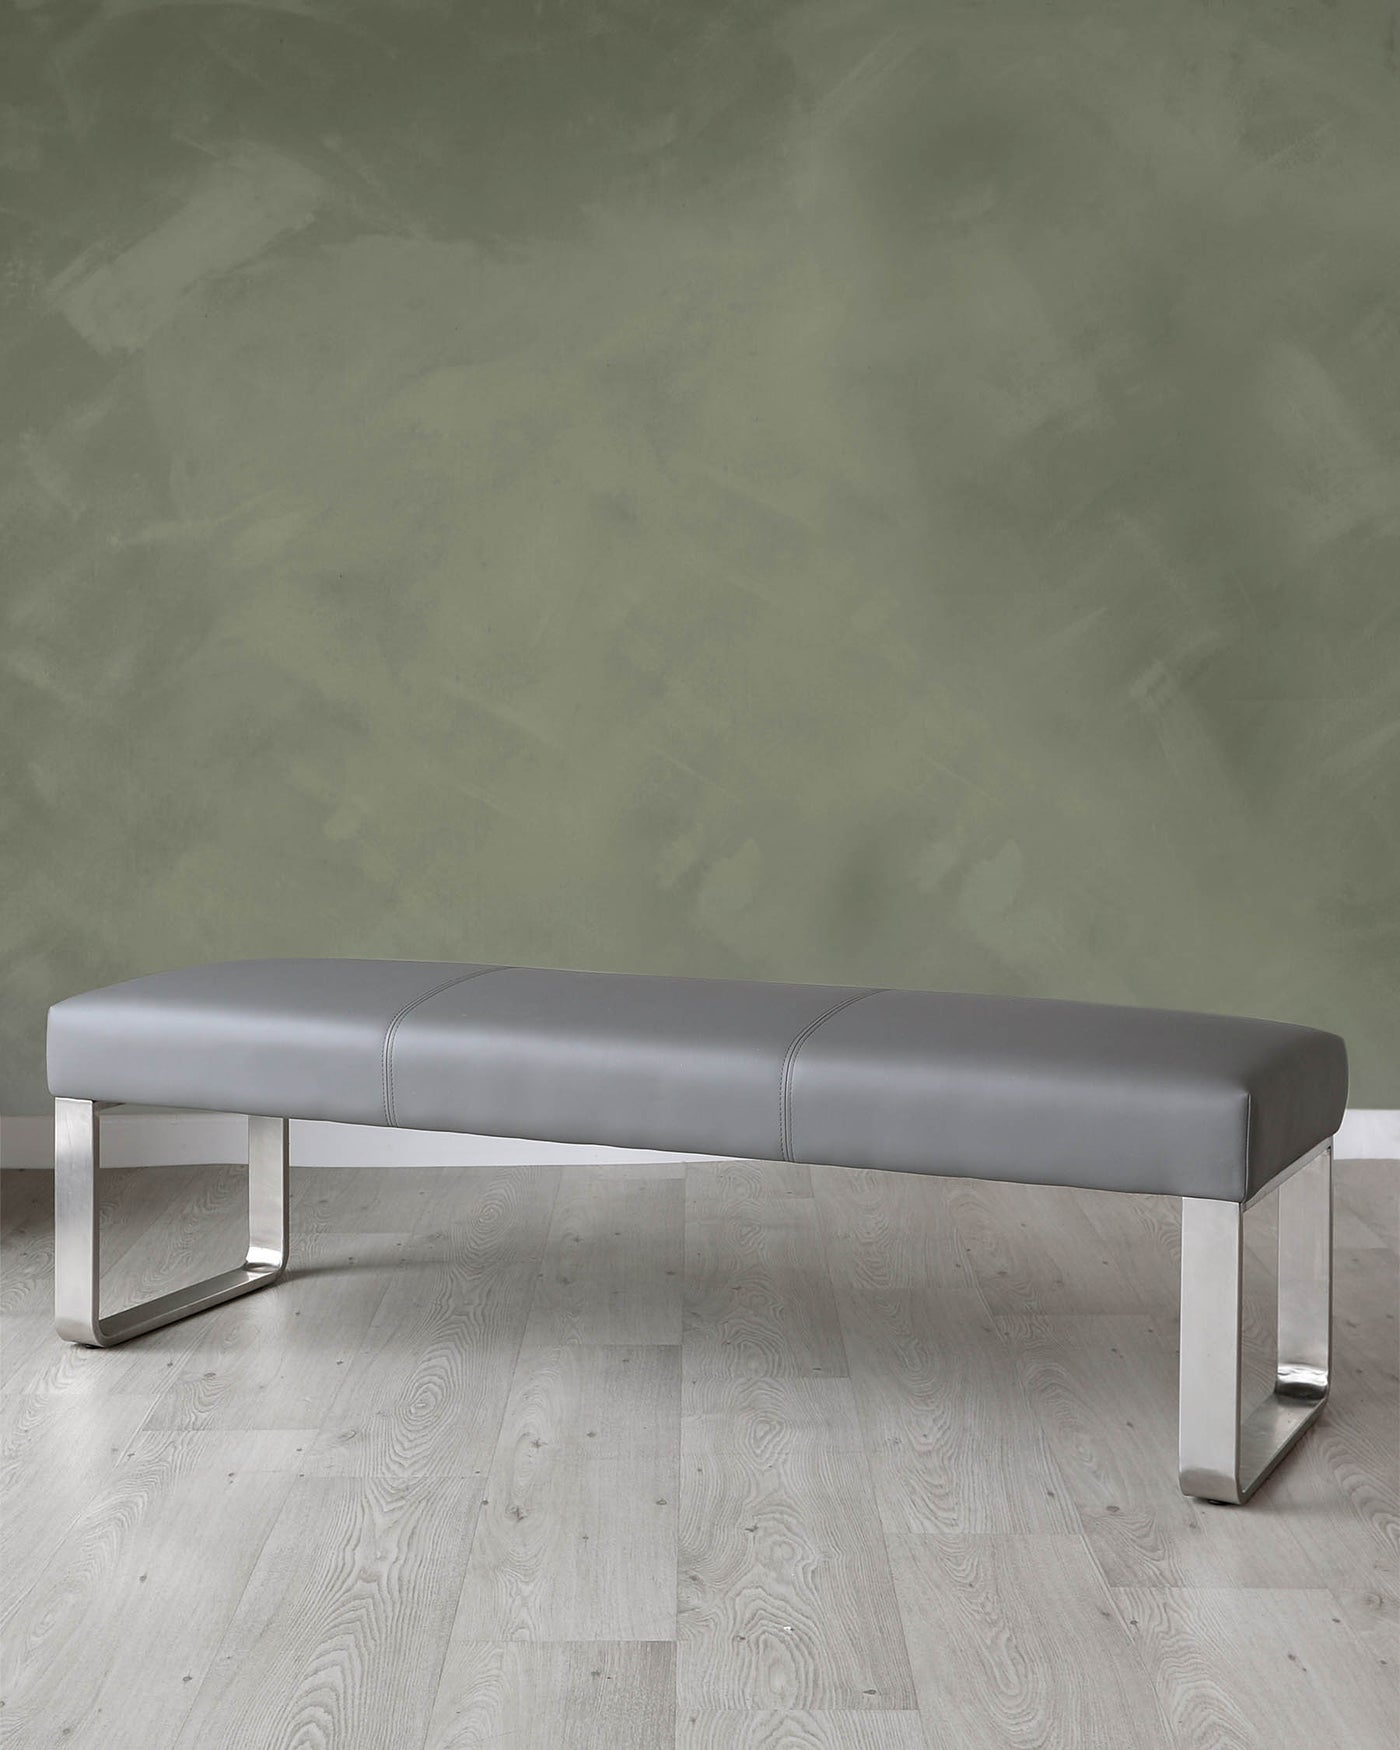 Modern grey leather bench with sleek chrome legs on a light wooden floor against a textured green wall.